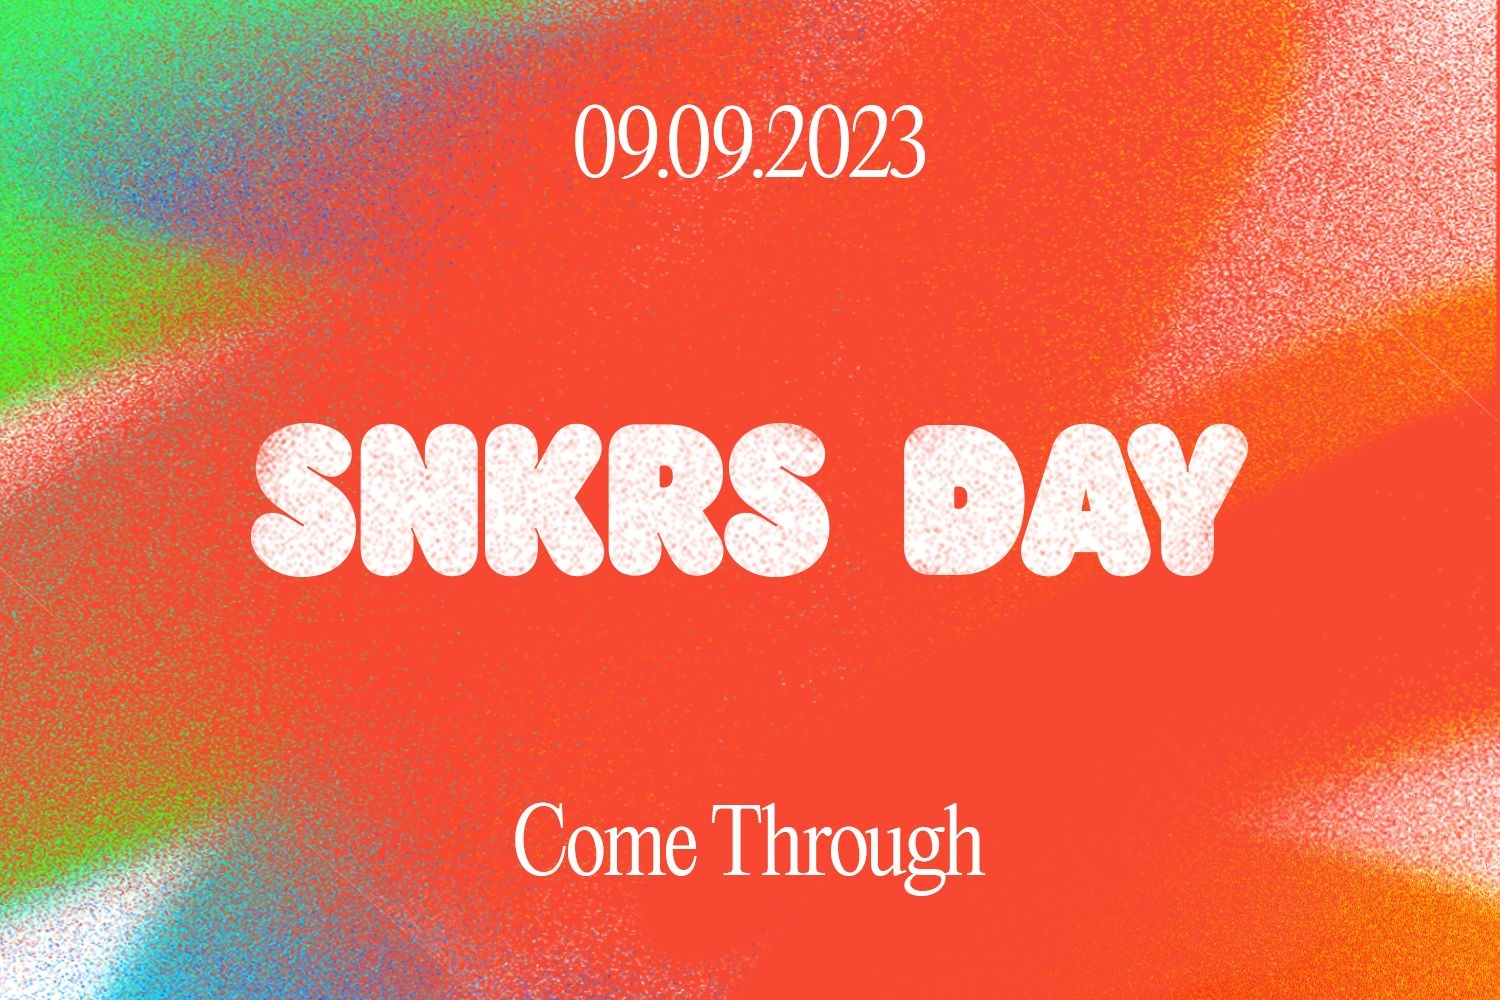 Nike SNKRS Day 2023 is coming up